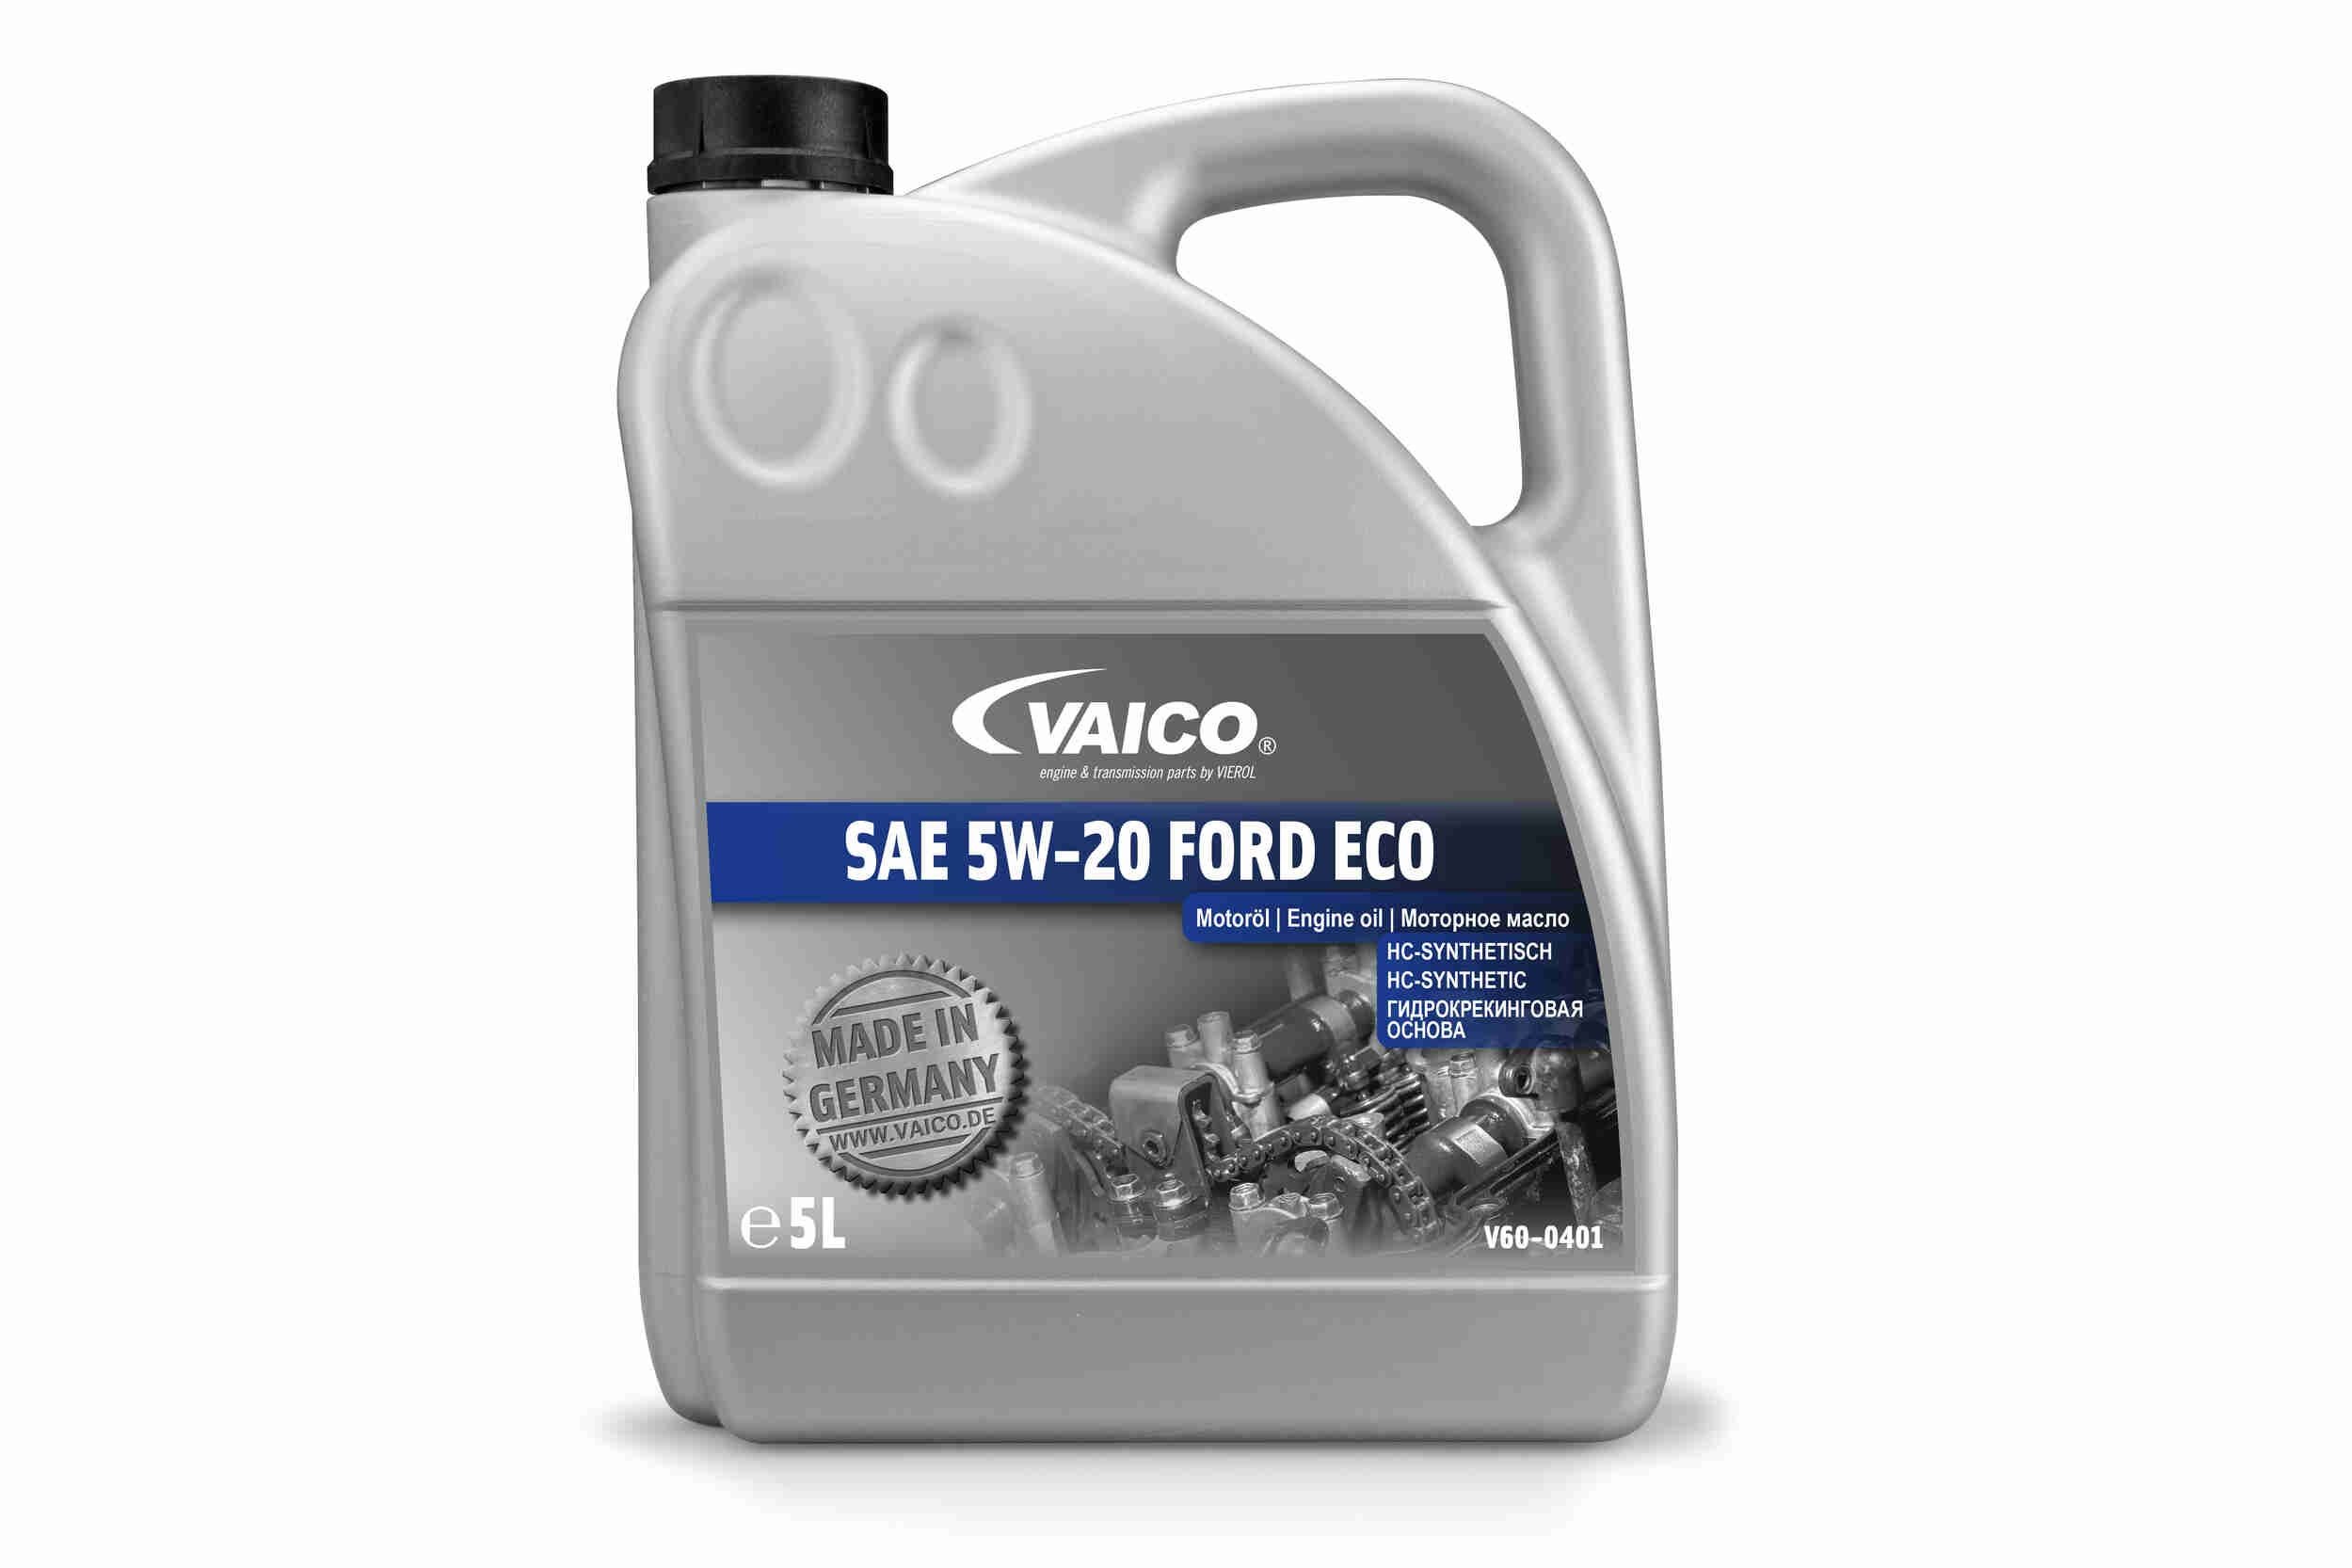 V600401 Motor oil Green Mobility Parts VAICO Ford WSS-M2C913-B review and test